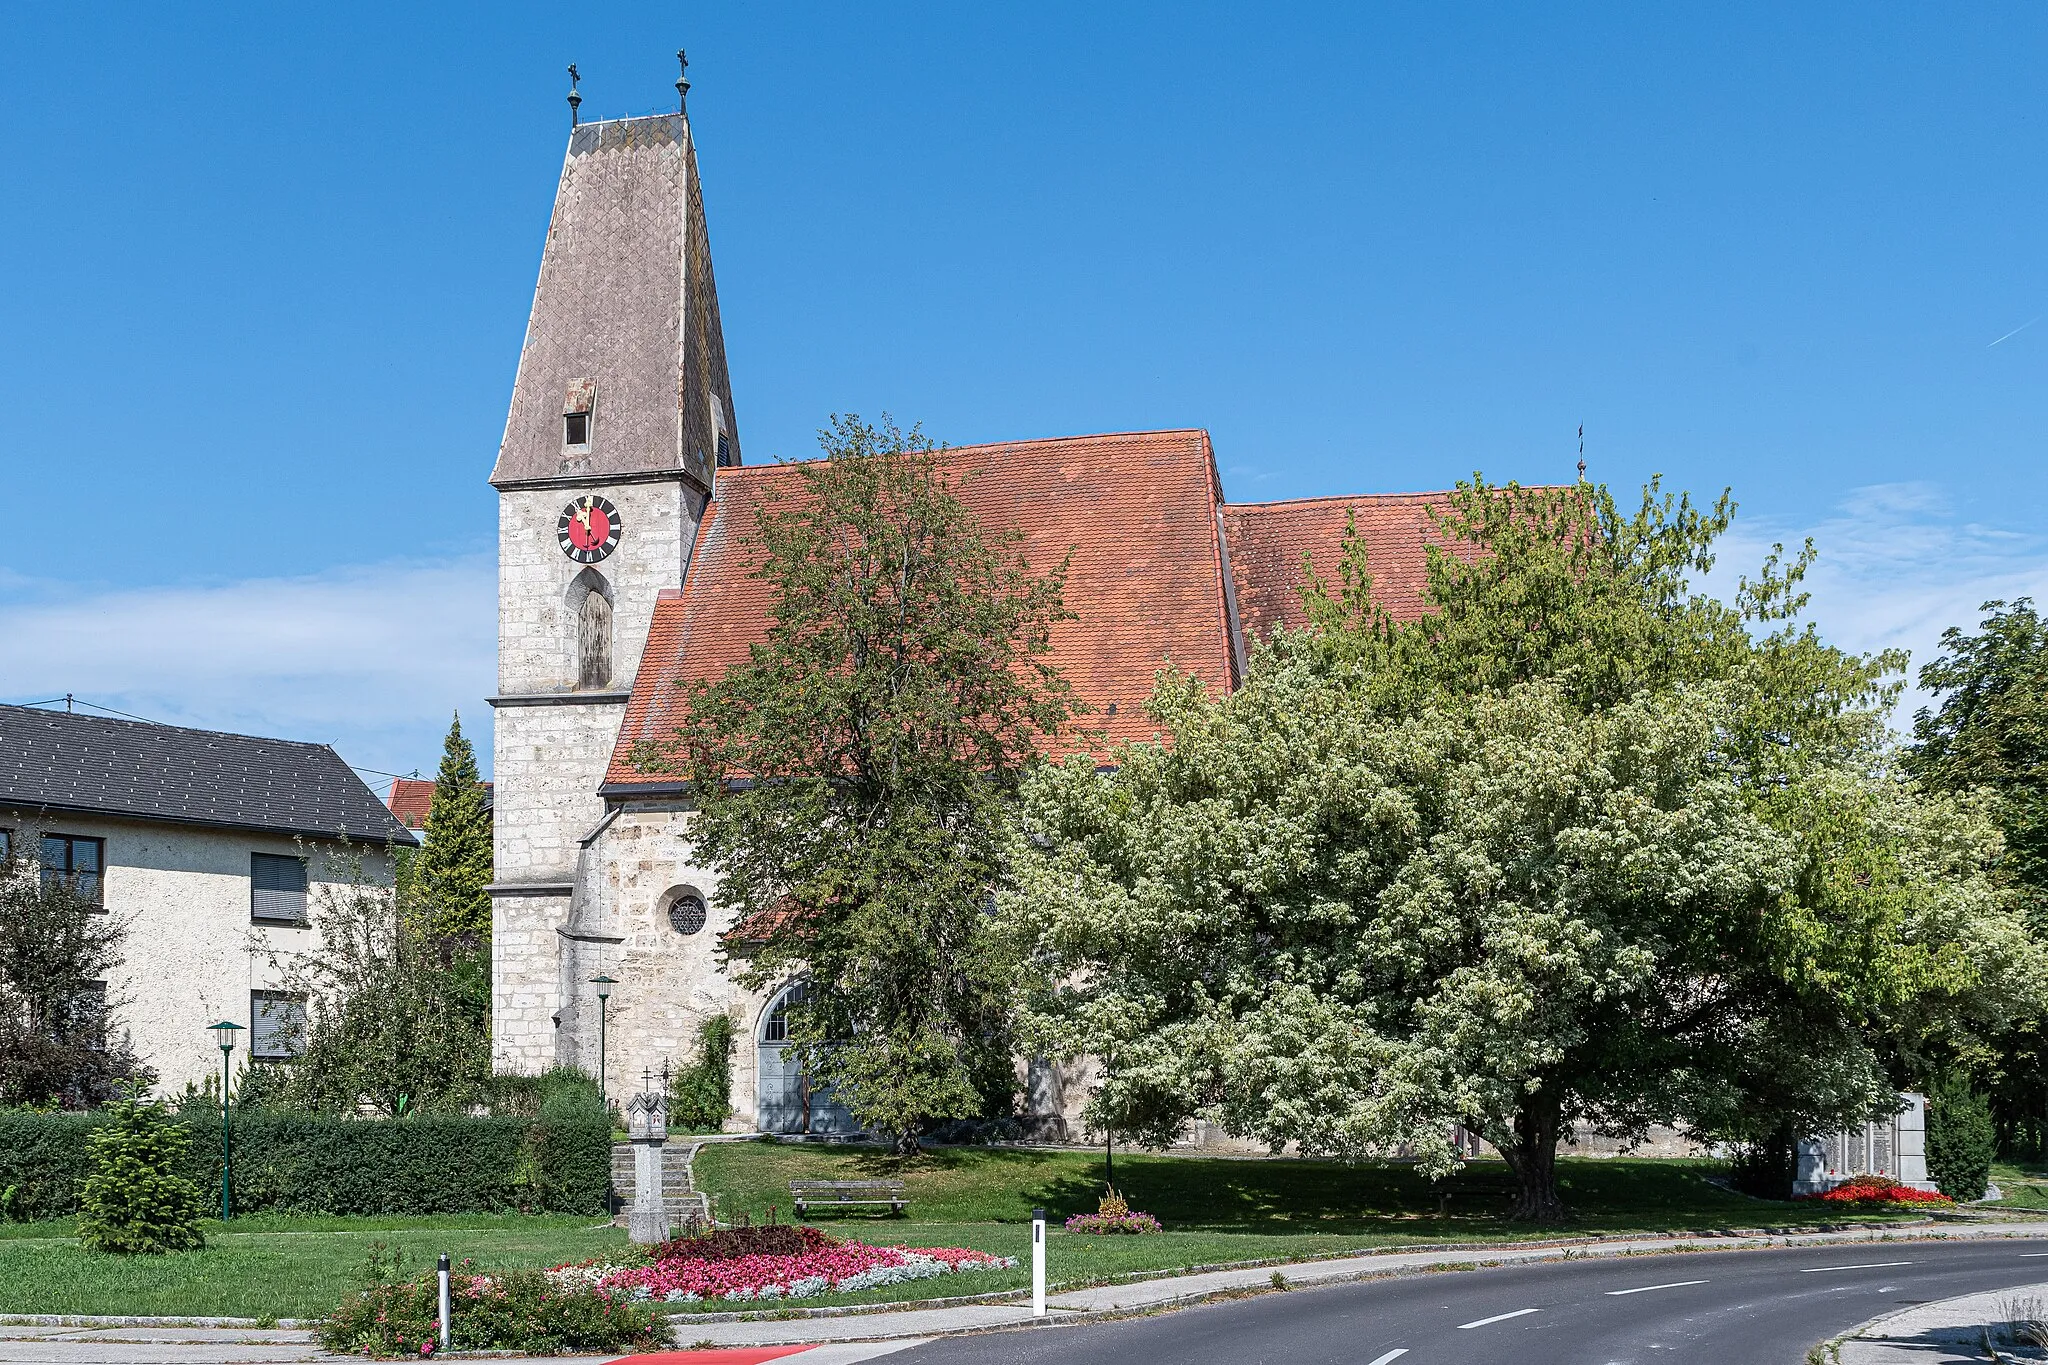 Photo showing: The parish church of Saint Margaret the Virgin is located in the center of the vilage Sipbachzell in Upper Austria.